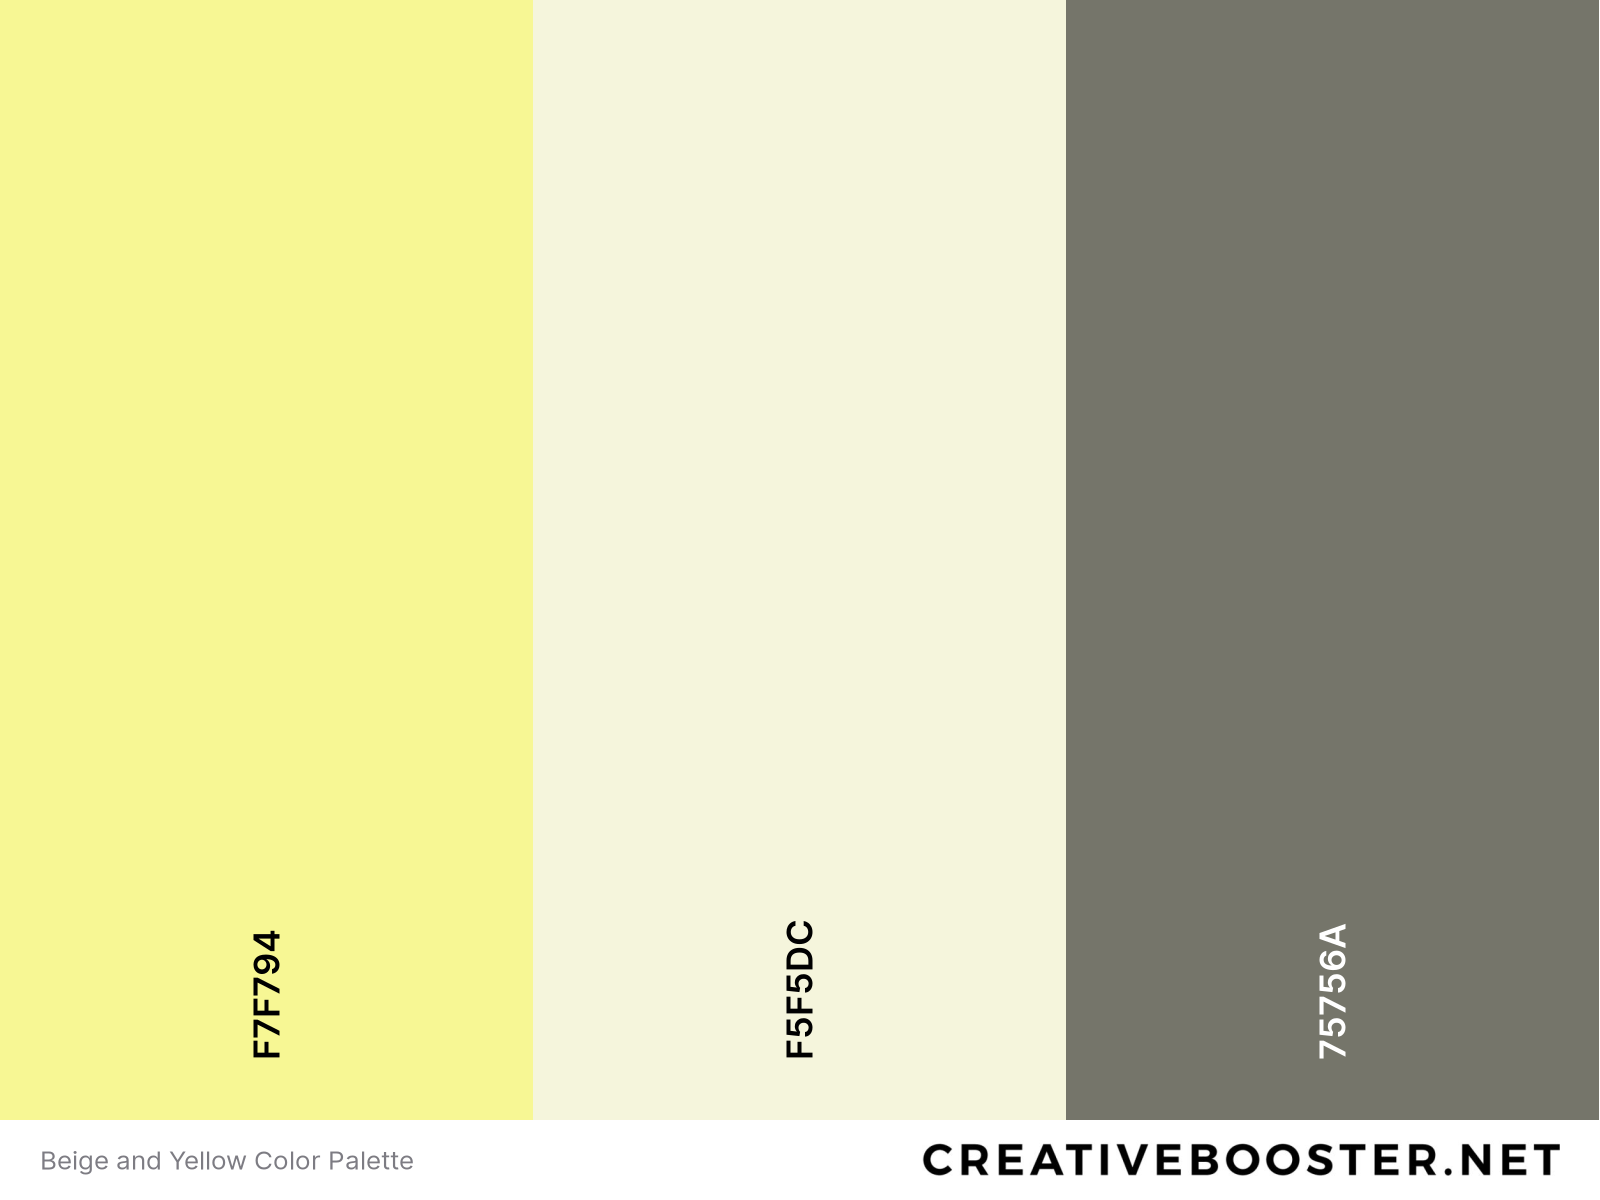 Beige and Yellow Color Palette